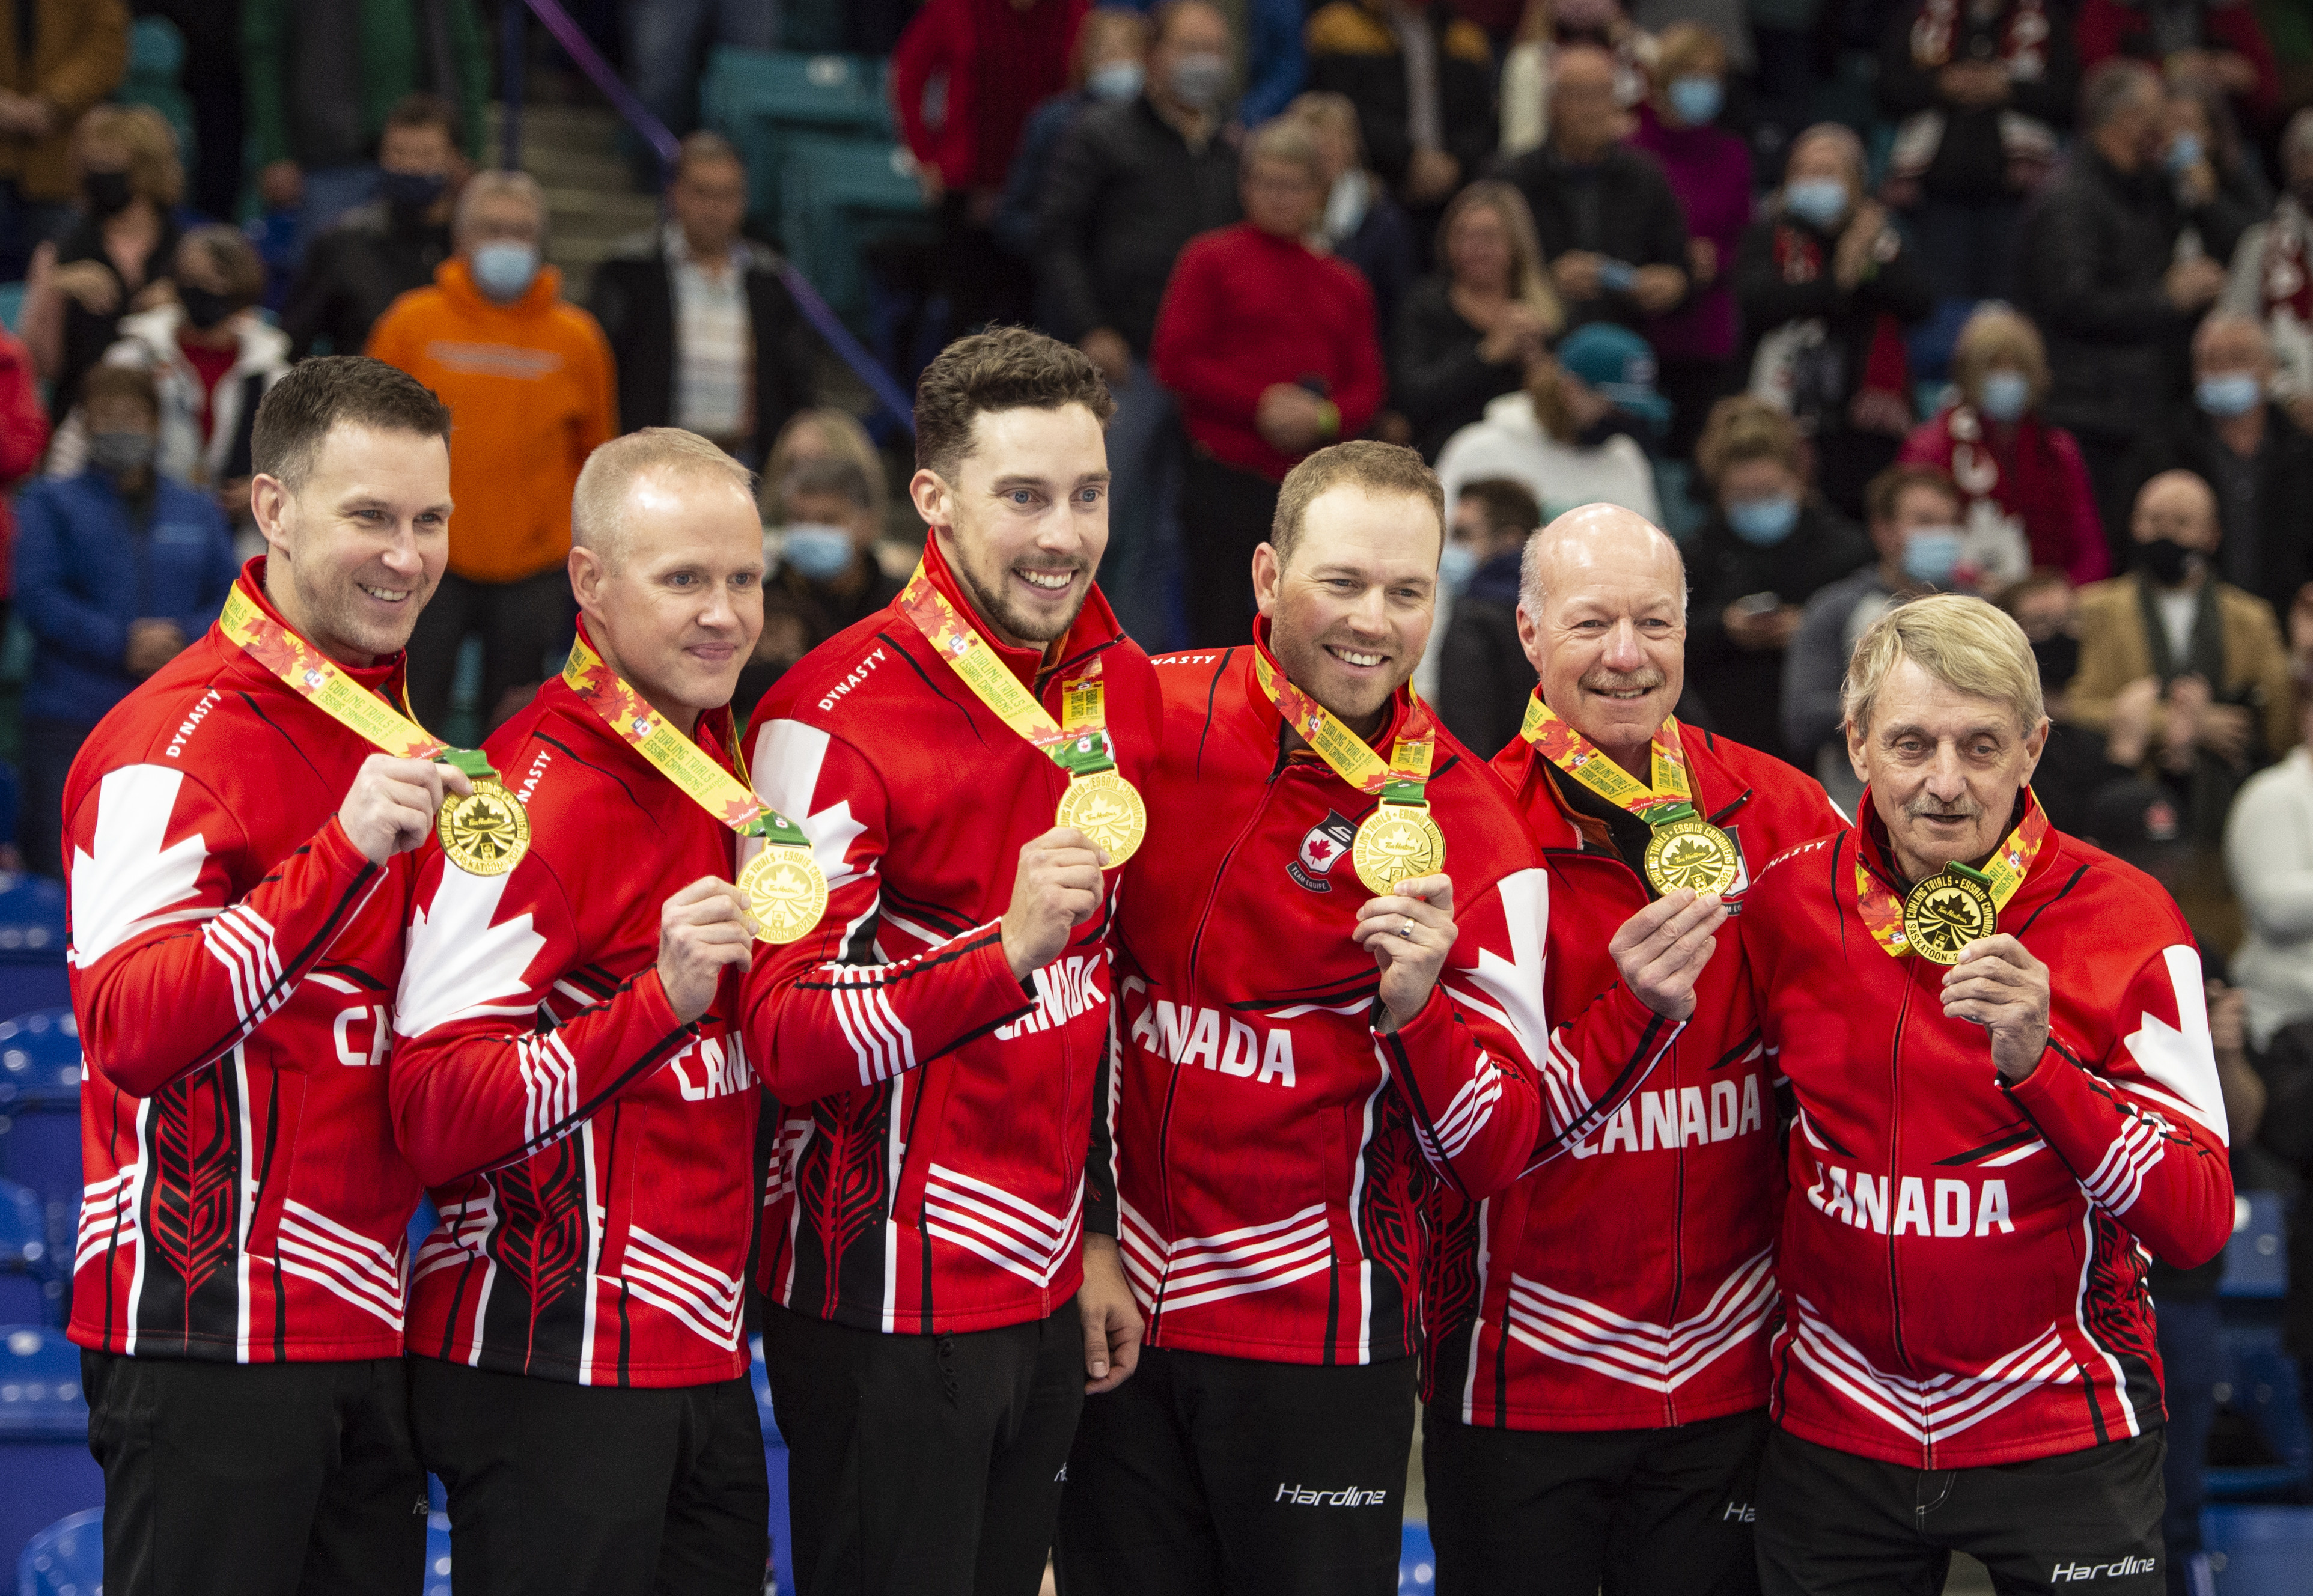 Meet the Team: A lightning round with Team Gushue - Team Canada